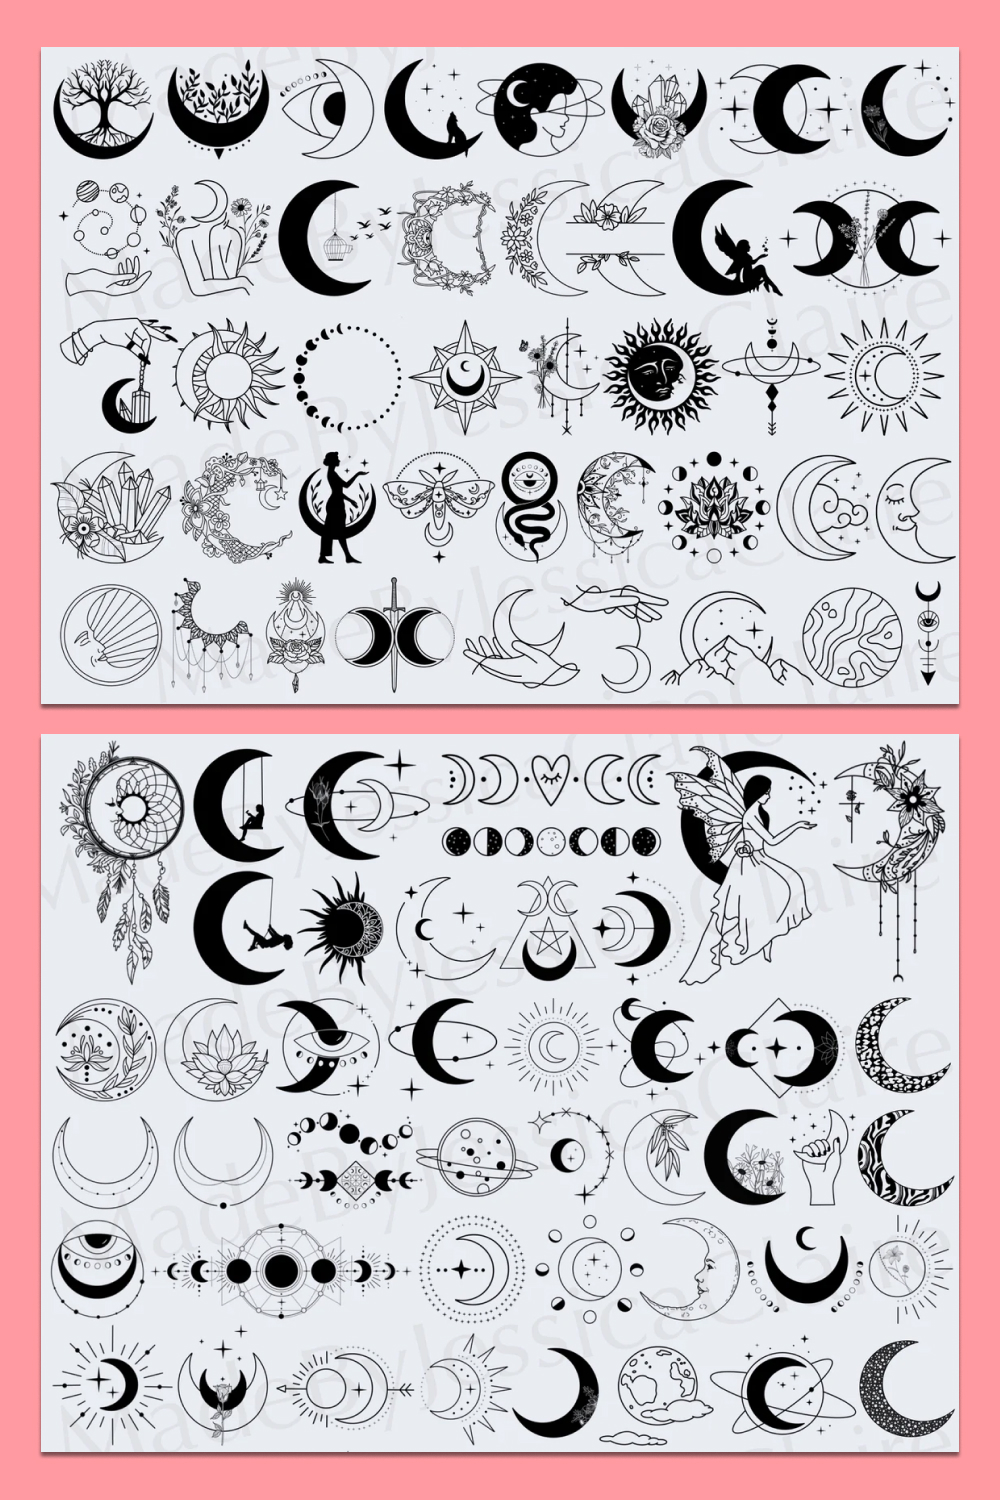 Different crescents and their use in prints.